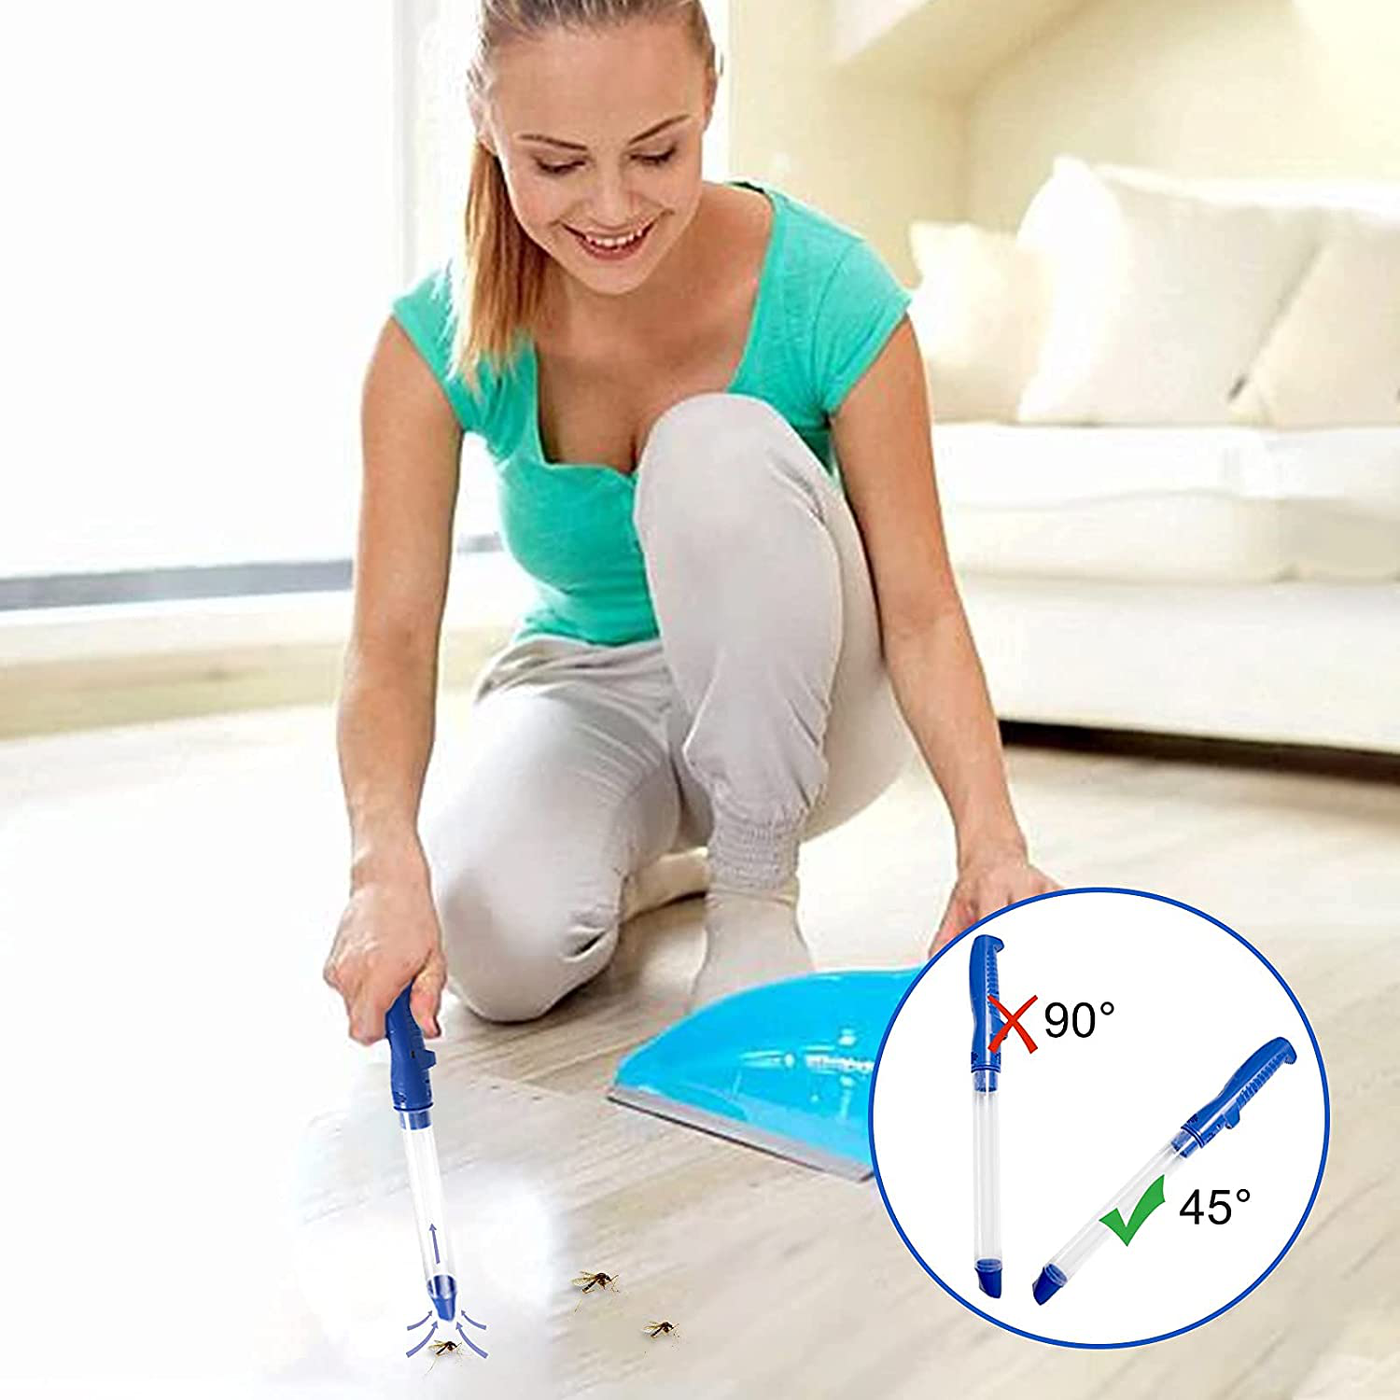 Powerful Vacuum Bug Catcher,Spider and Insect Traps Catcher with USB Rechargeable Blue Bug Pest Control,Insects and Handheld Bug Catcher with LED Flashlight for Stink Bug,Beetle,Pest Suction Trap